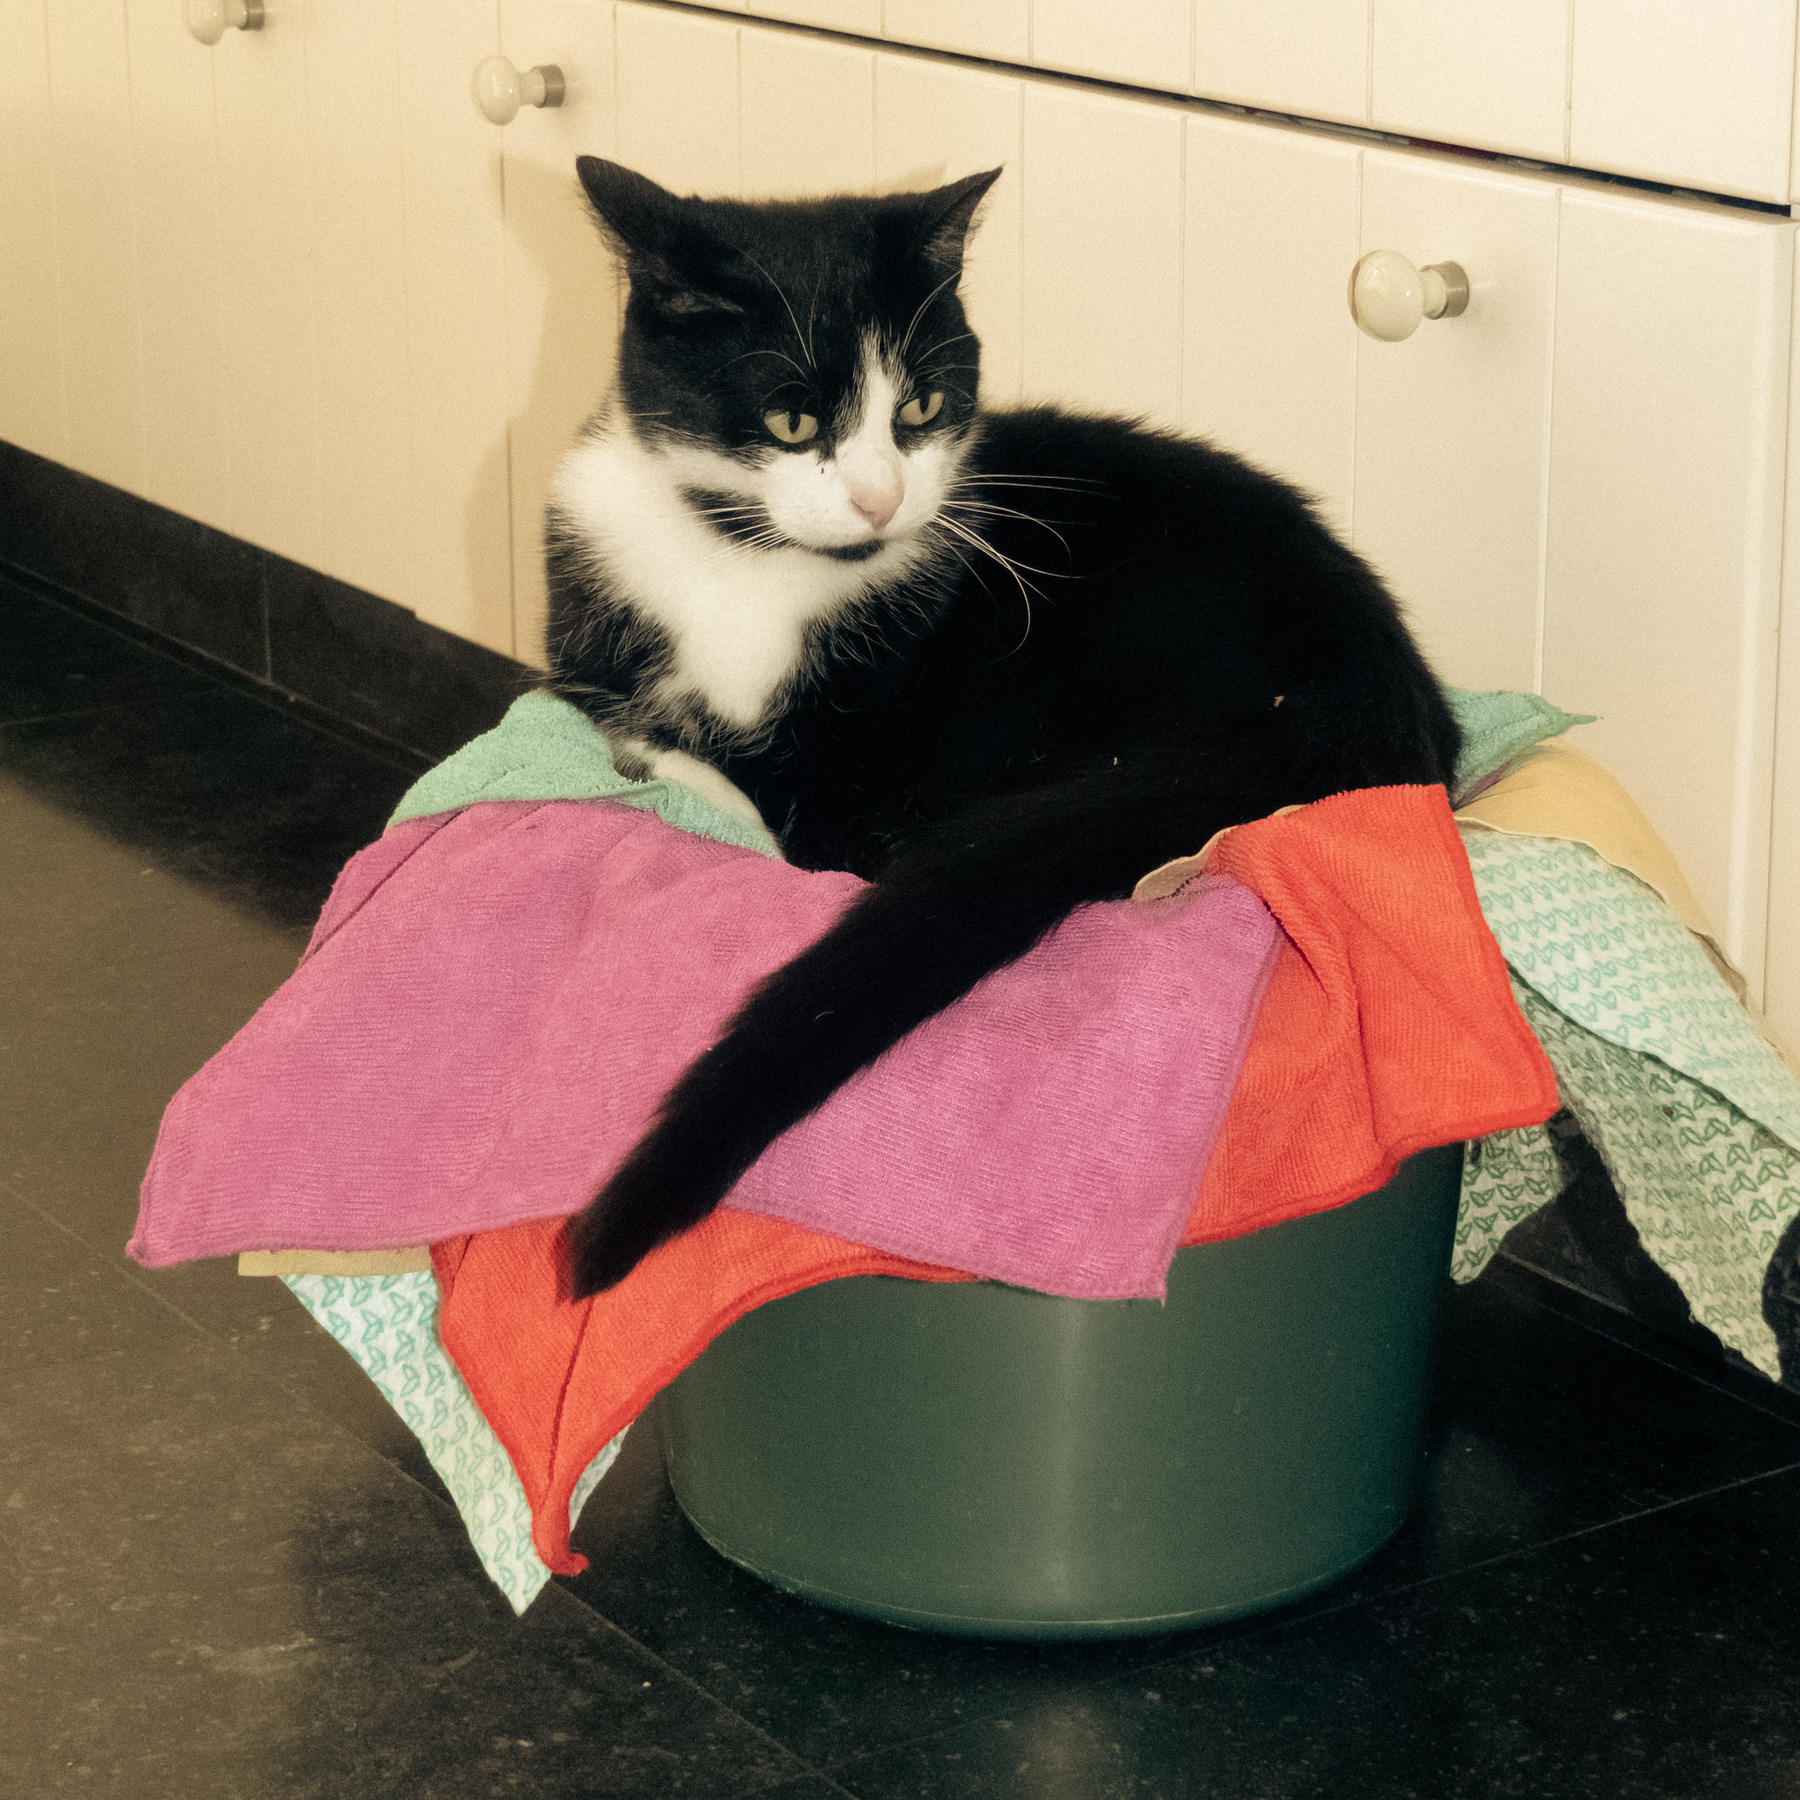 A black and white cat in a bucket with cleaning rags